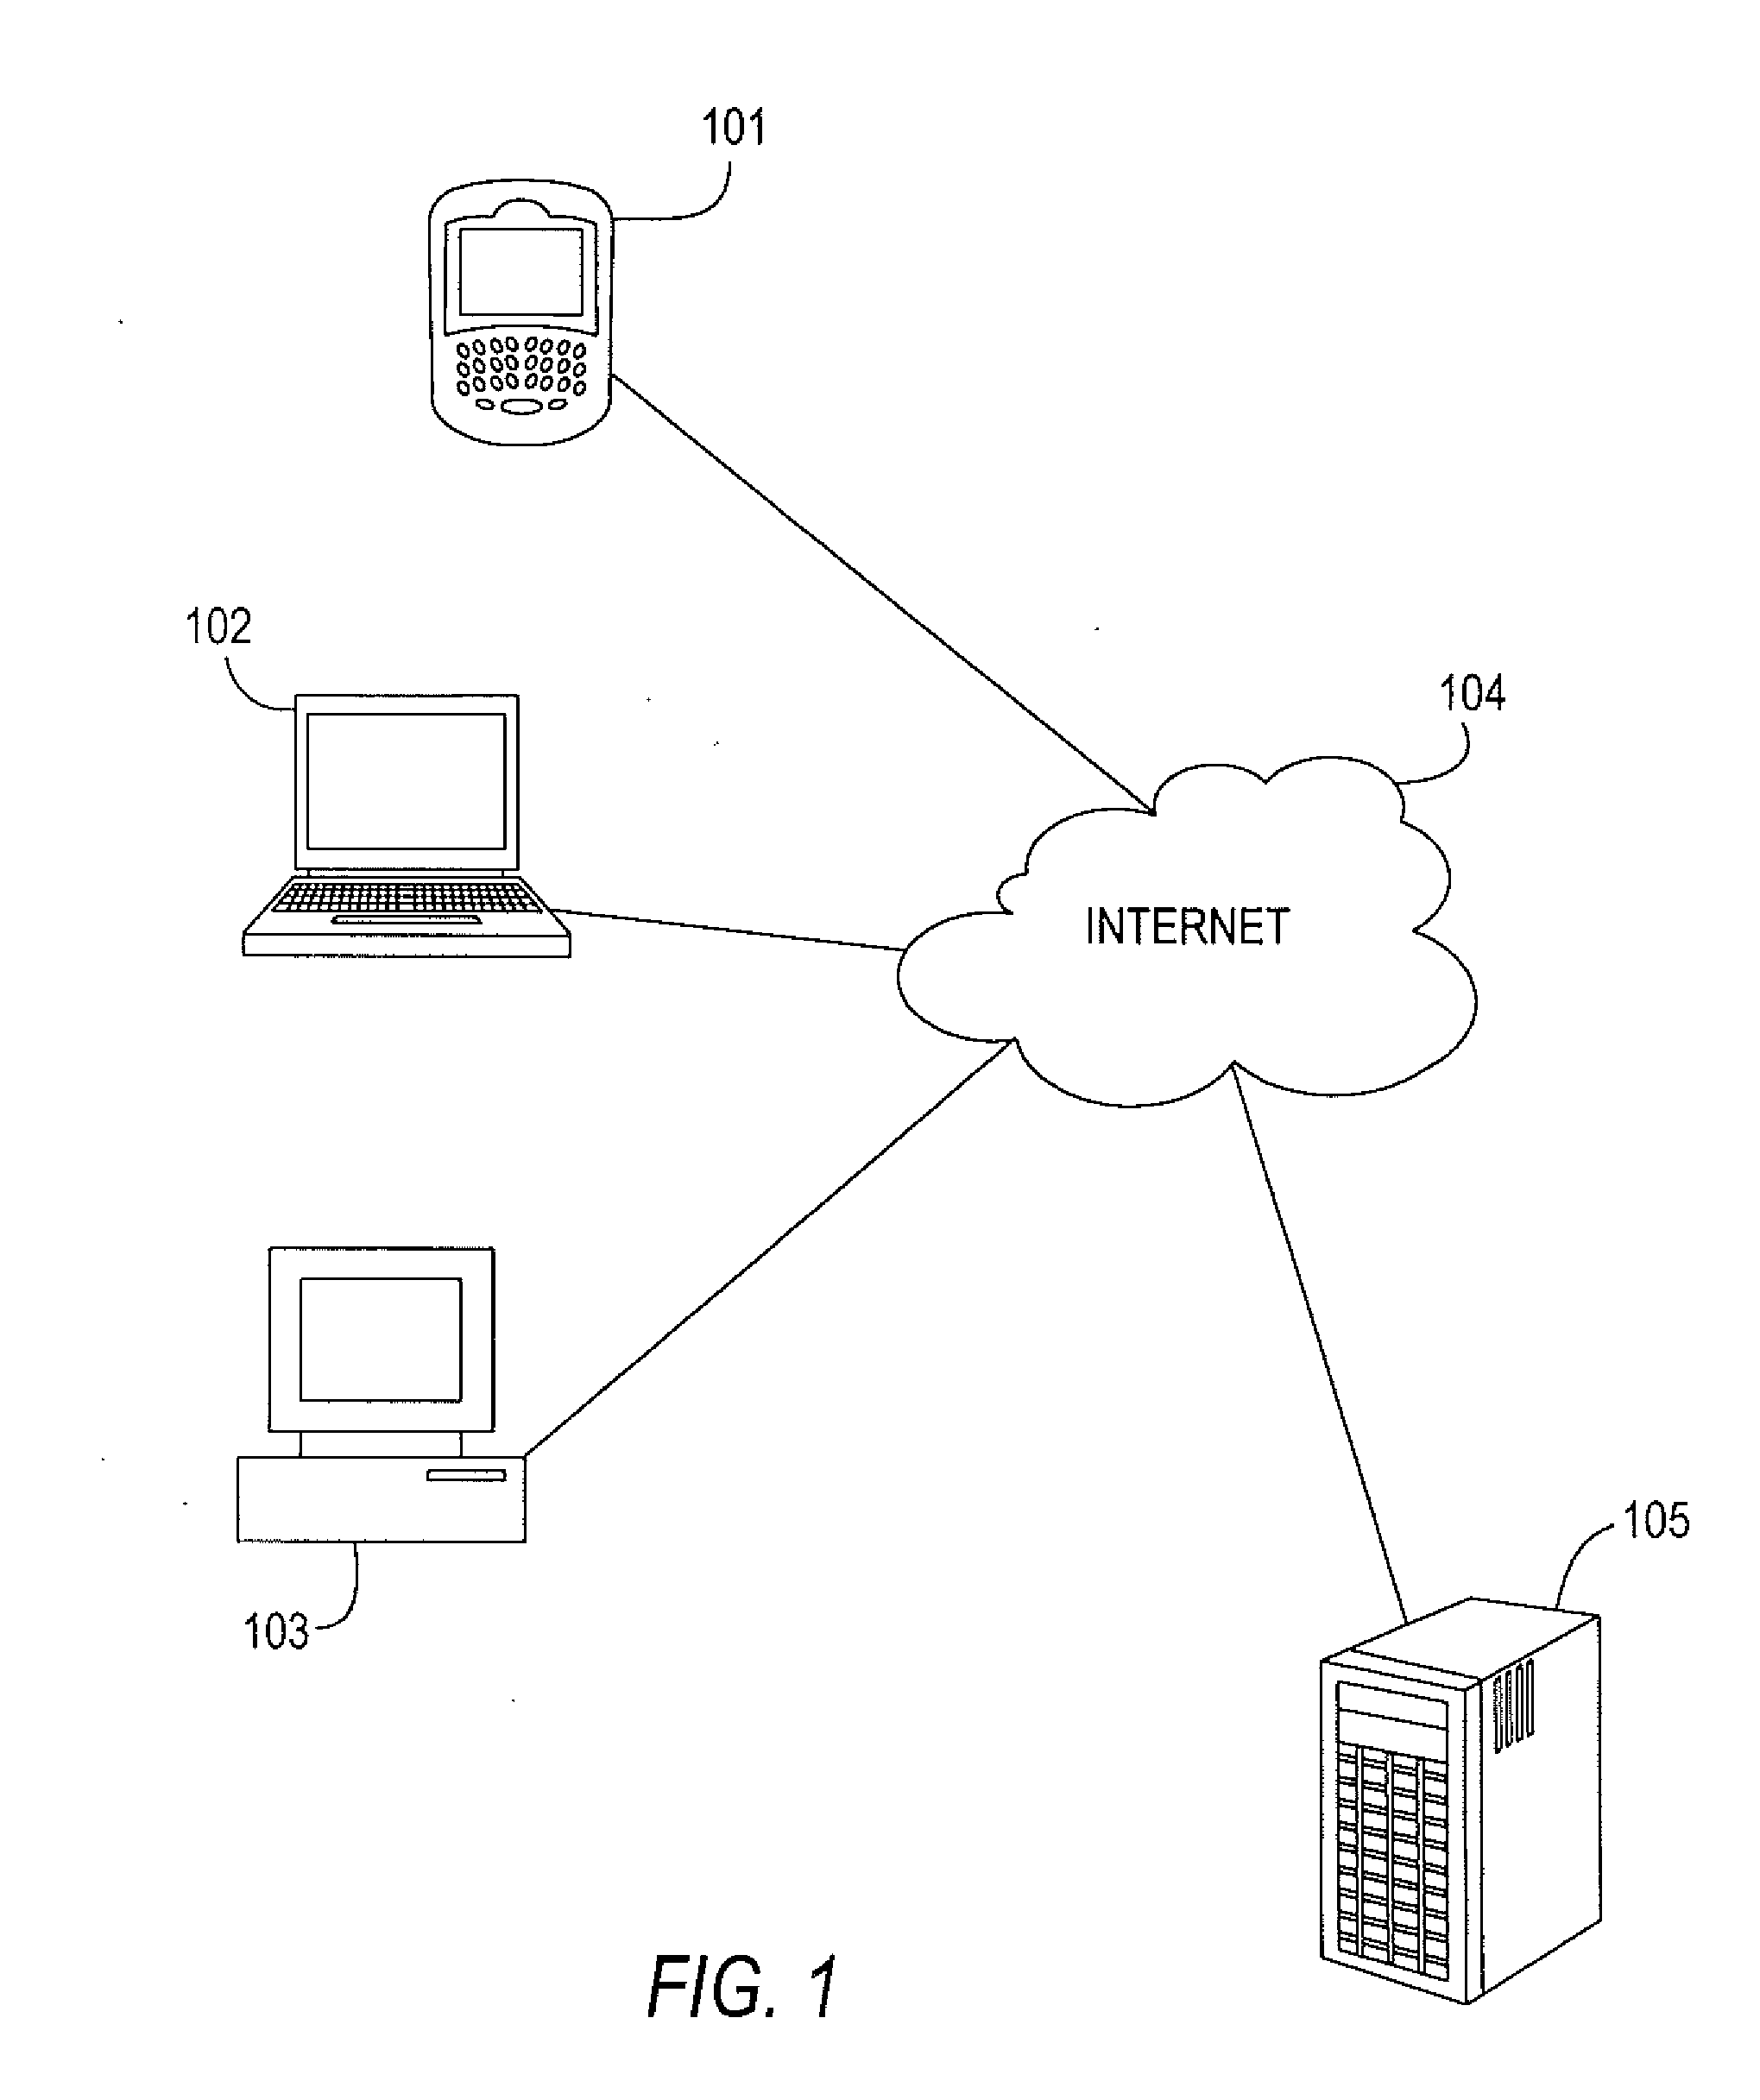 Electronic system for assisting the study and practice of medicine